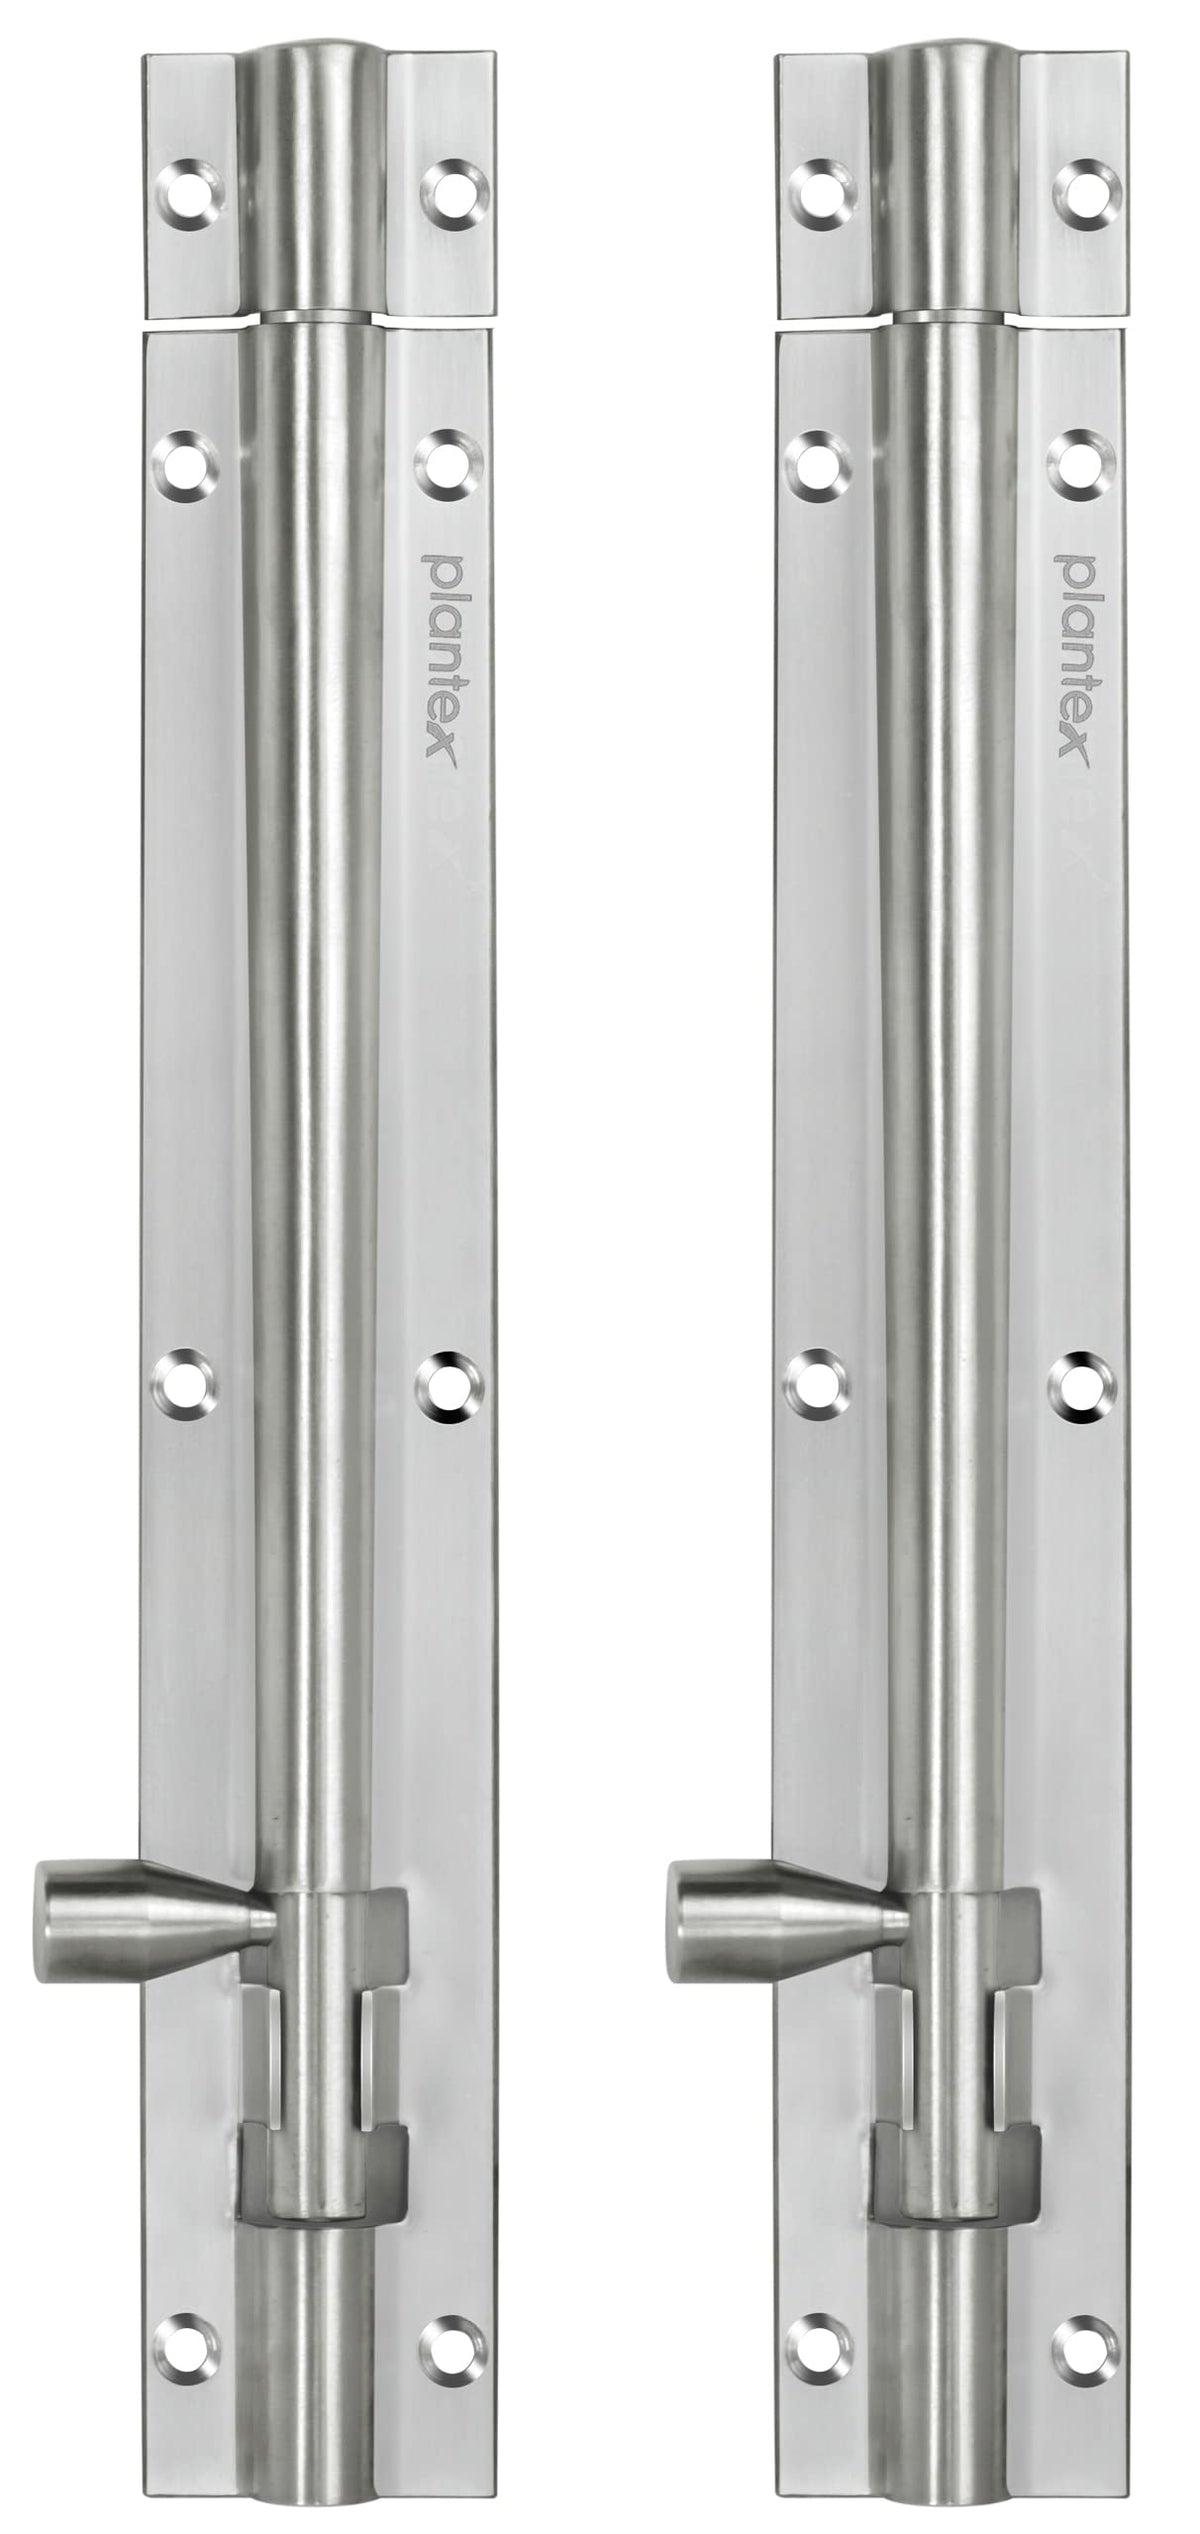 Plantex 8- inches Long Tower Bolt for Door/Windows/Wardrobe - Pack of 2 (Chrome-Silver)